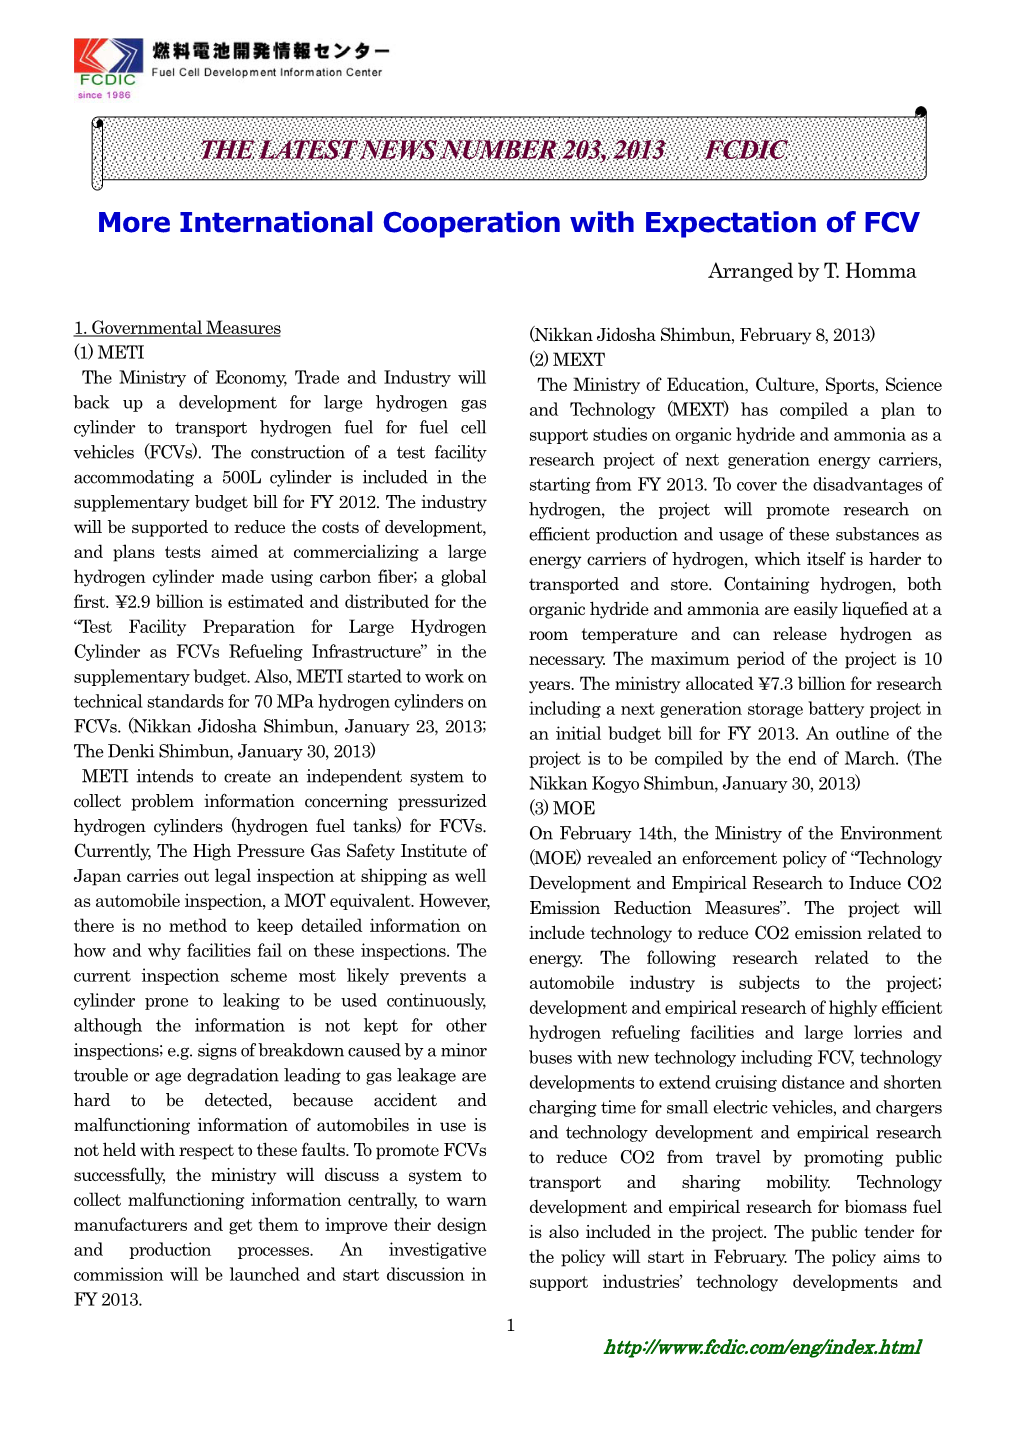 More International Cooperation with Expectation of FCV the LATEST